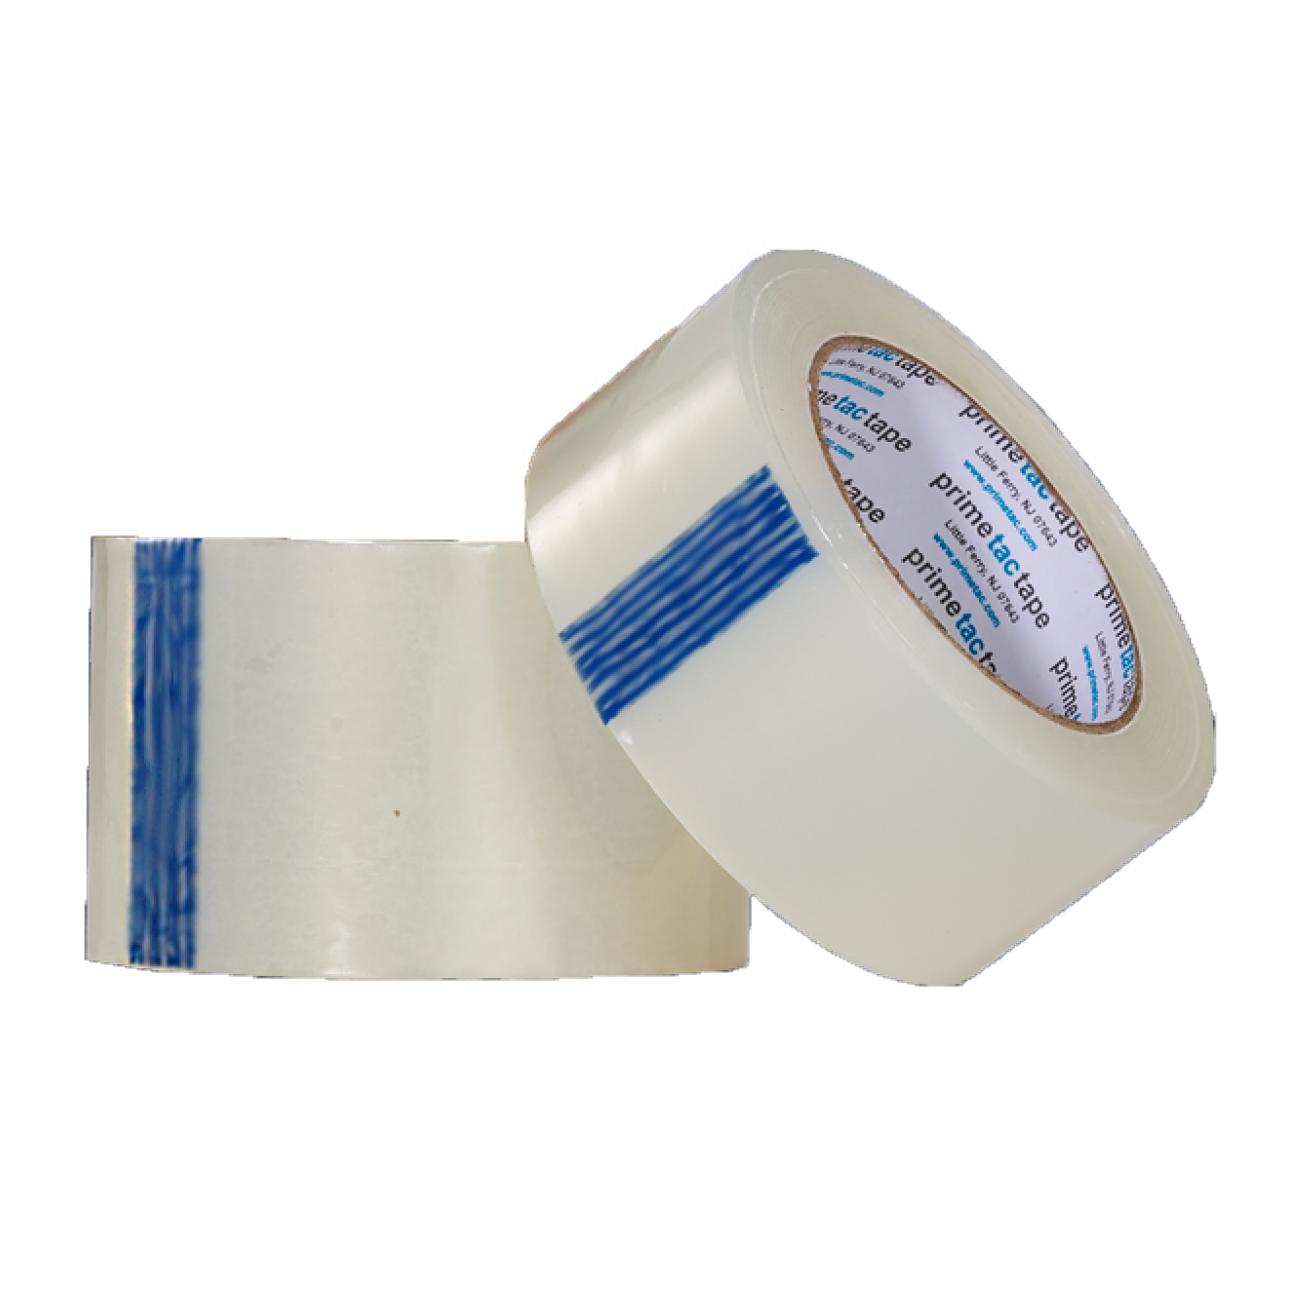 2-CST 2 inch x 110 Yard roll of Carton Sealing Tape - Case of 6 Rolls